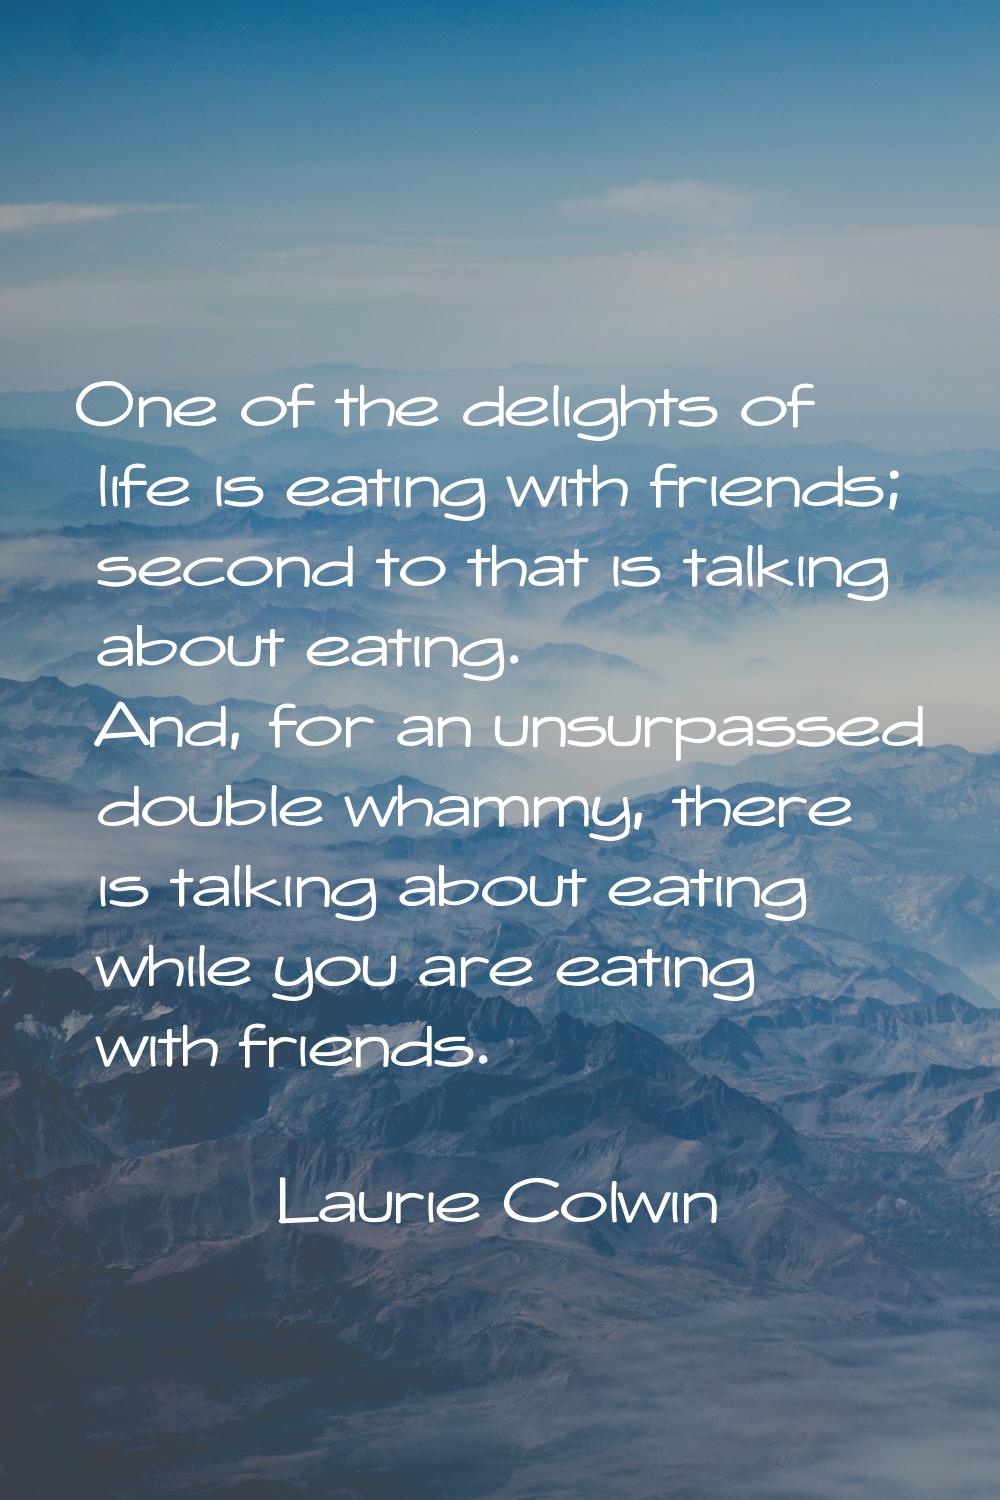 One of the delights of life is eating with friends; second to that is talking about eating. And, fo